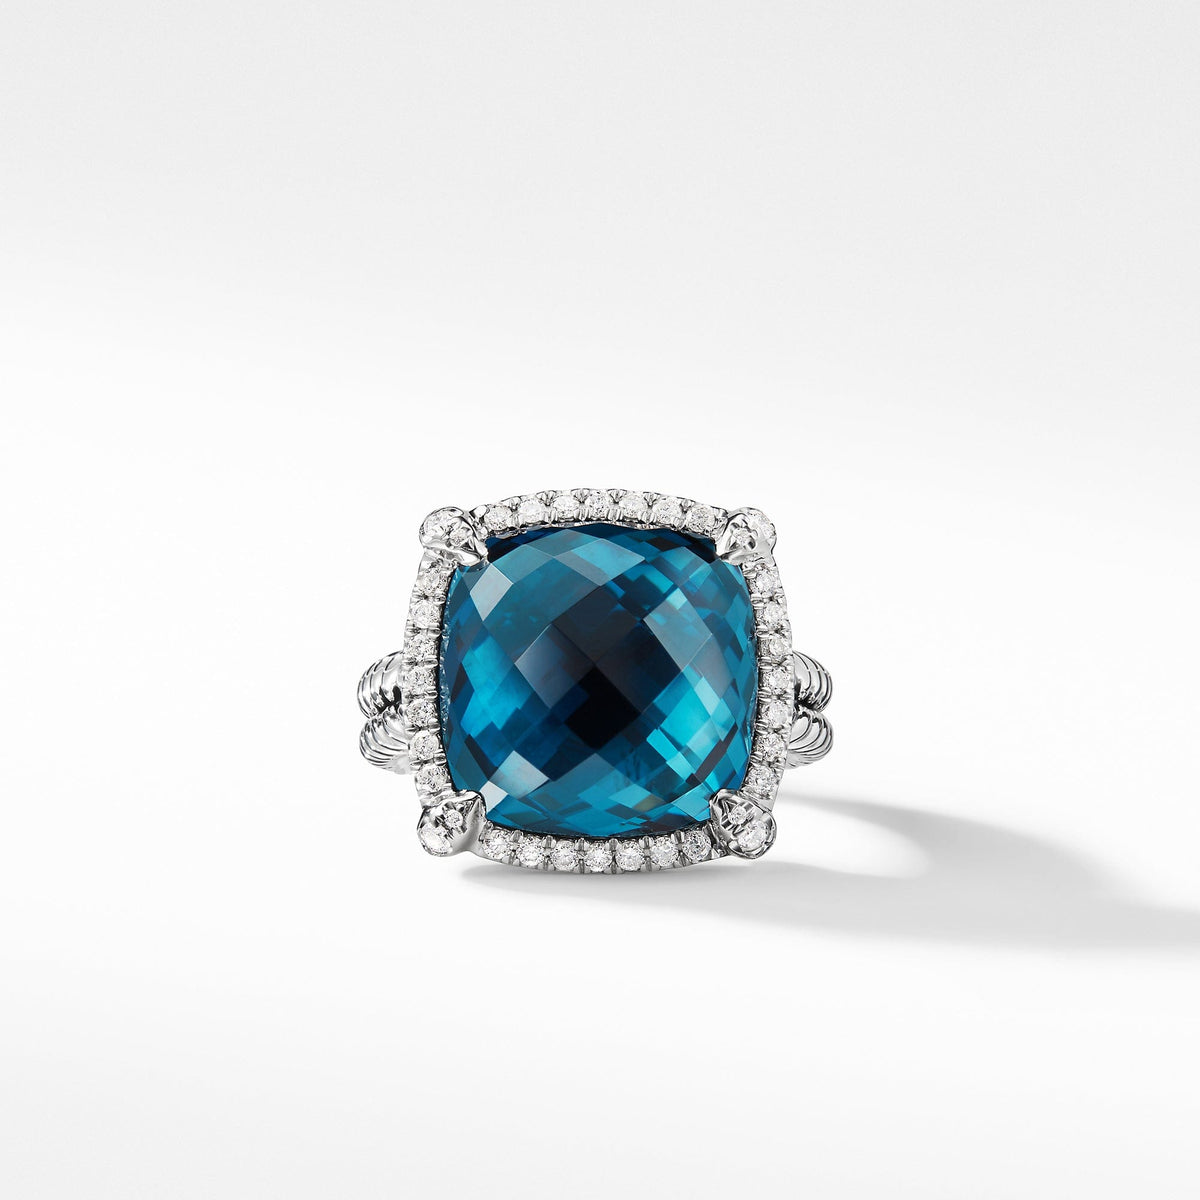 Chatelaine Pave Bezel Ring with Hampton Blue Topaz and Diamonds, 14mm